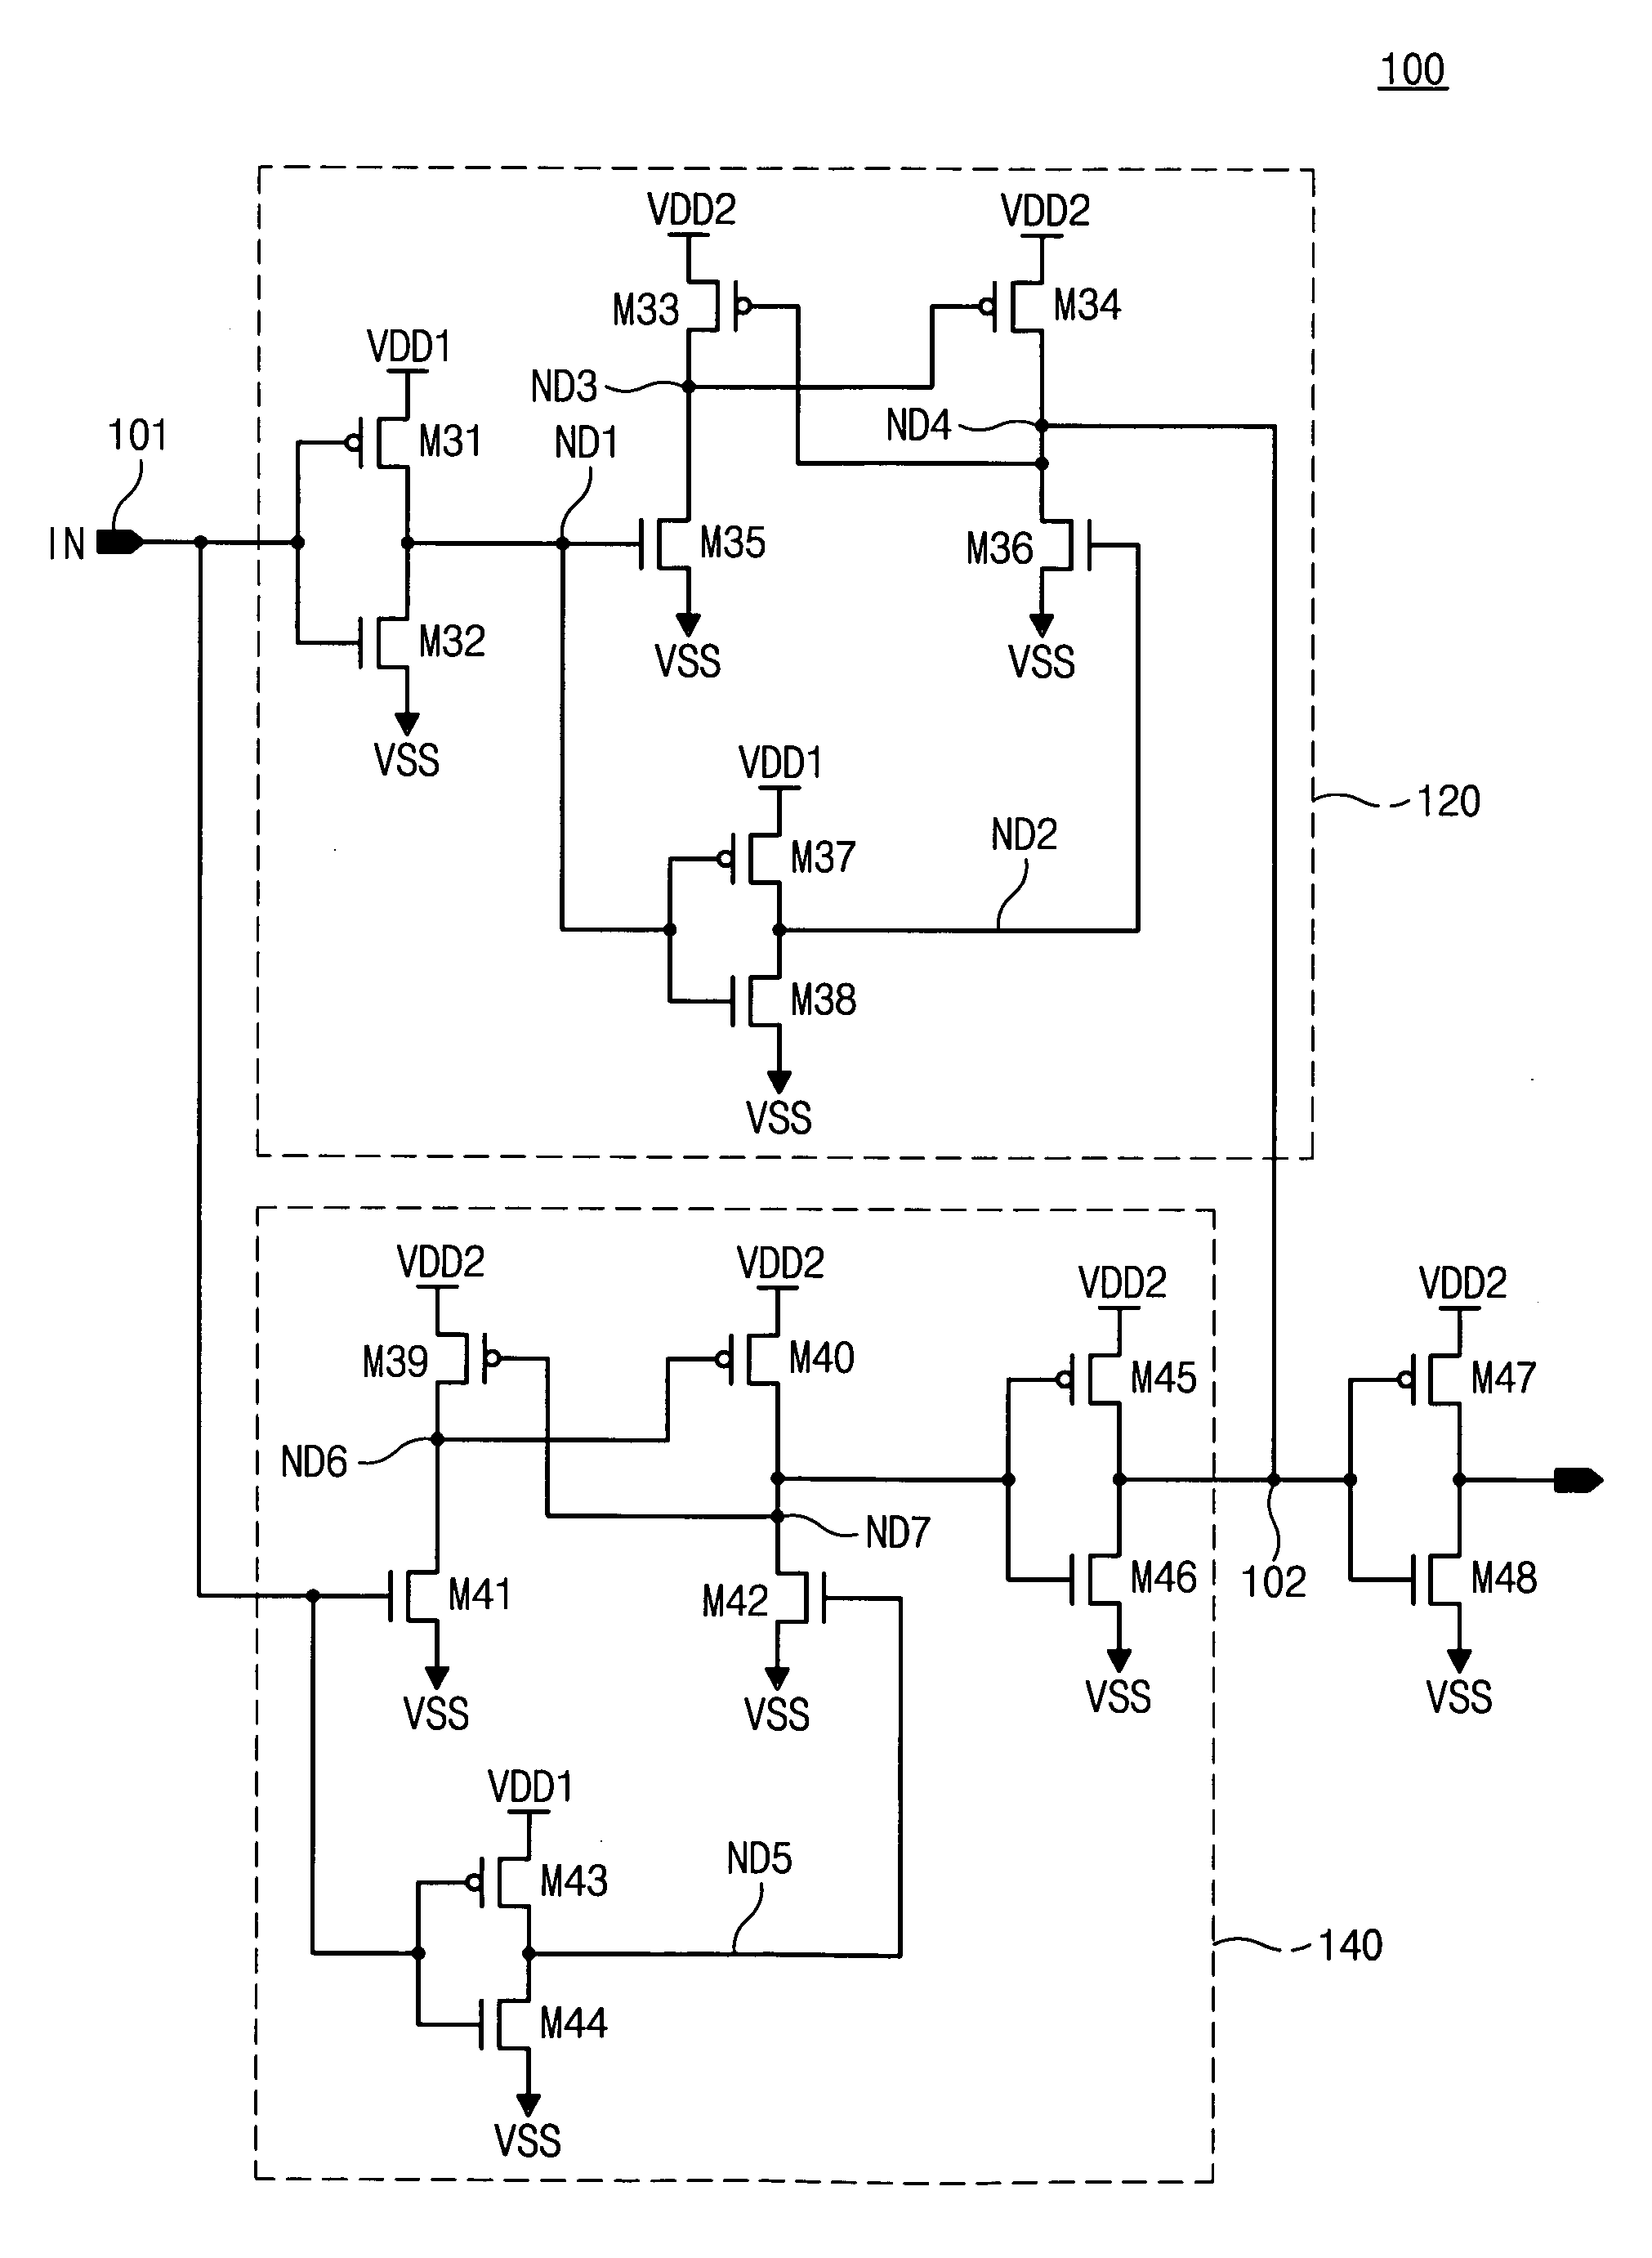 Voltage conversion circuit with stable transition delay characteristic